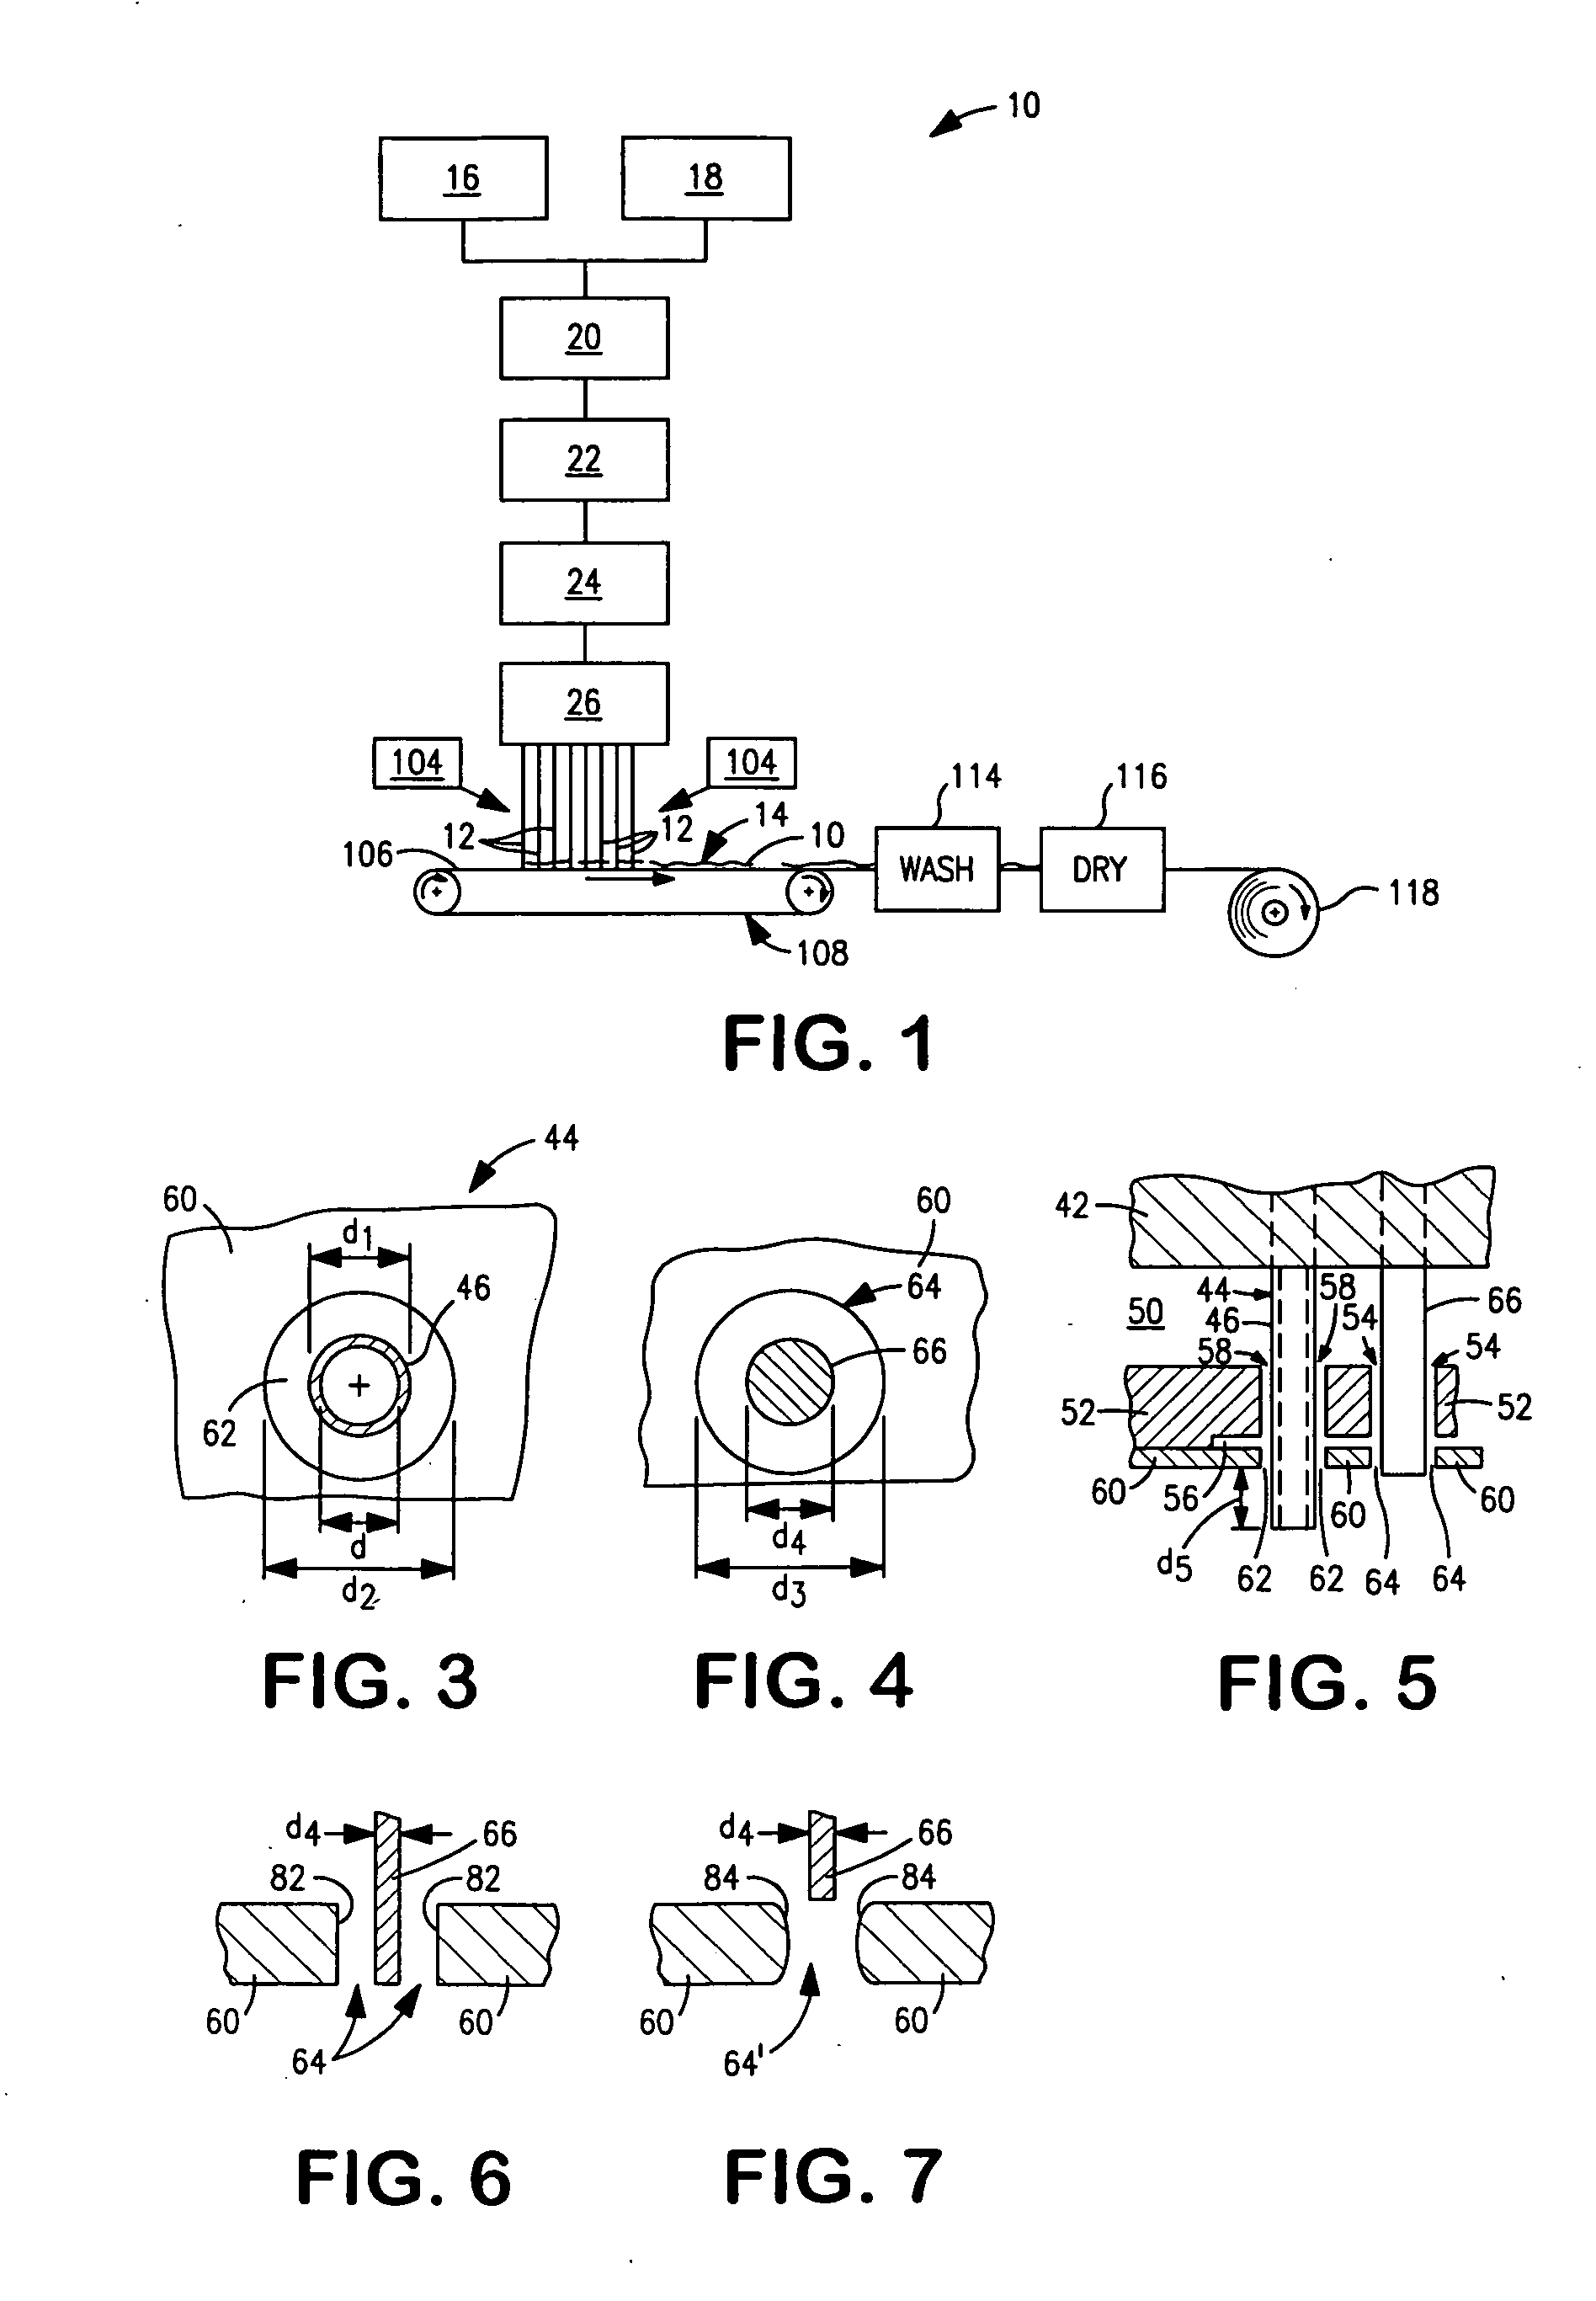 Array of nozzles for extruding multiple cellulose fibers